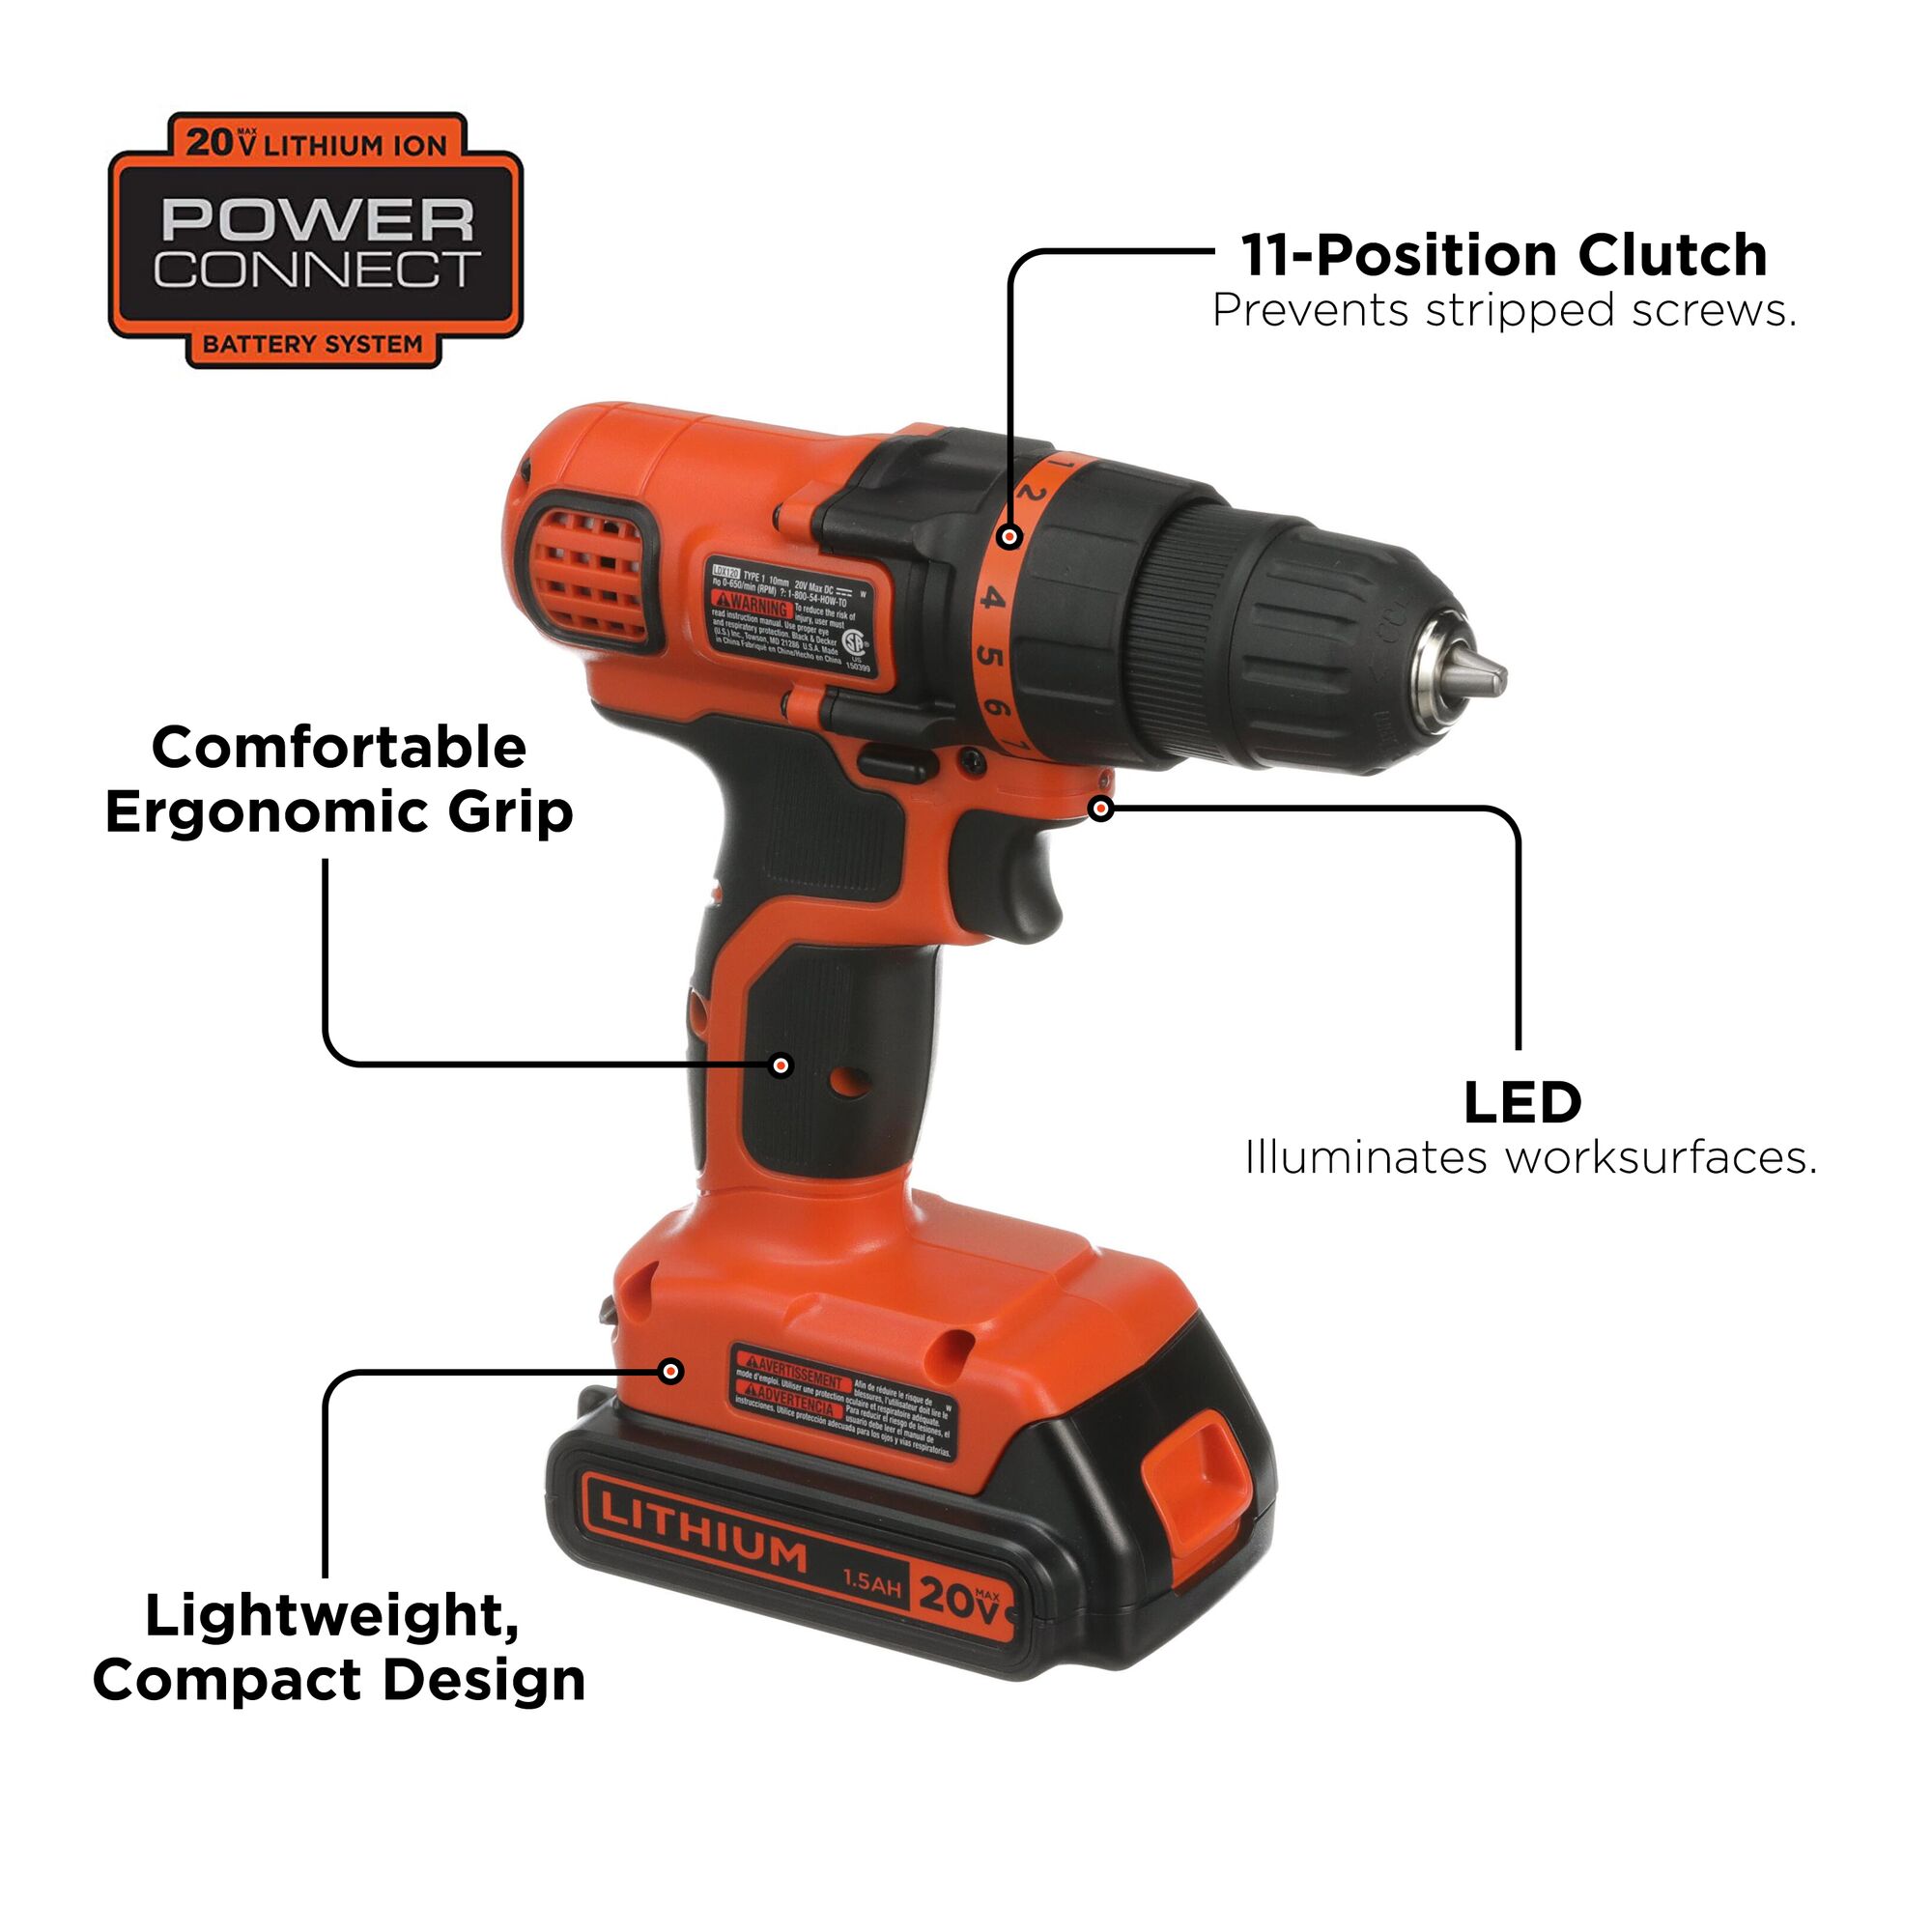 Black & Decker 20V Max Drill & Home Tool Kit Review: Jack-of-All-Trades